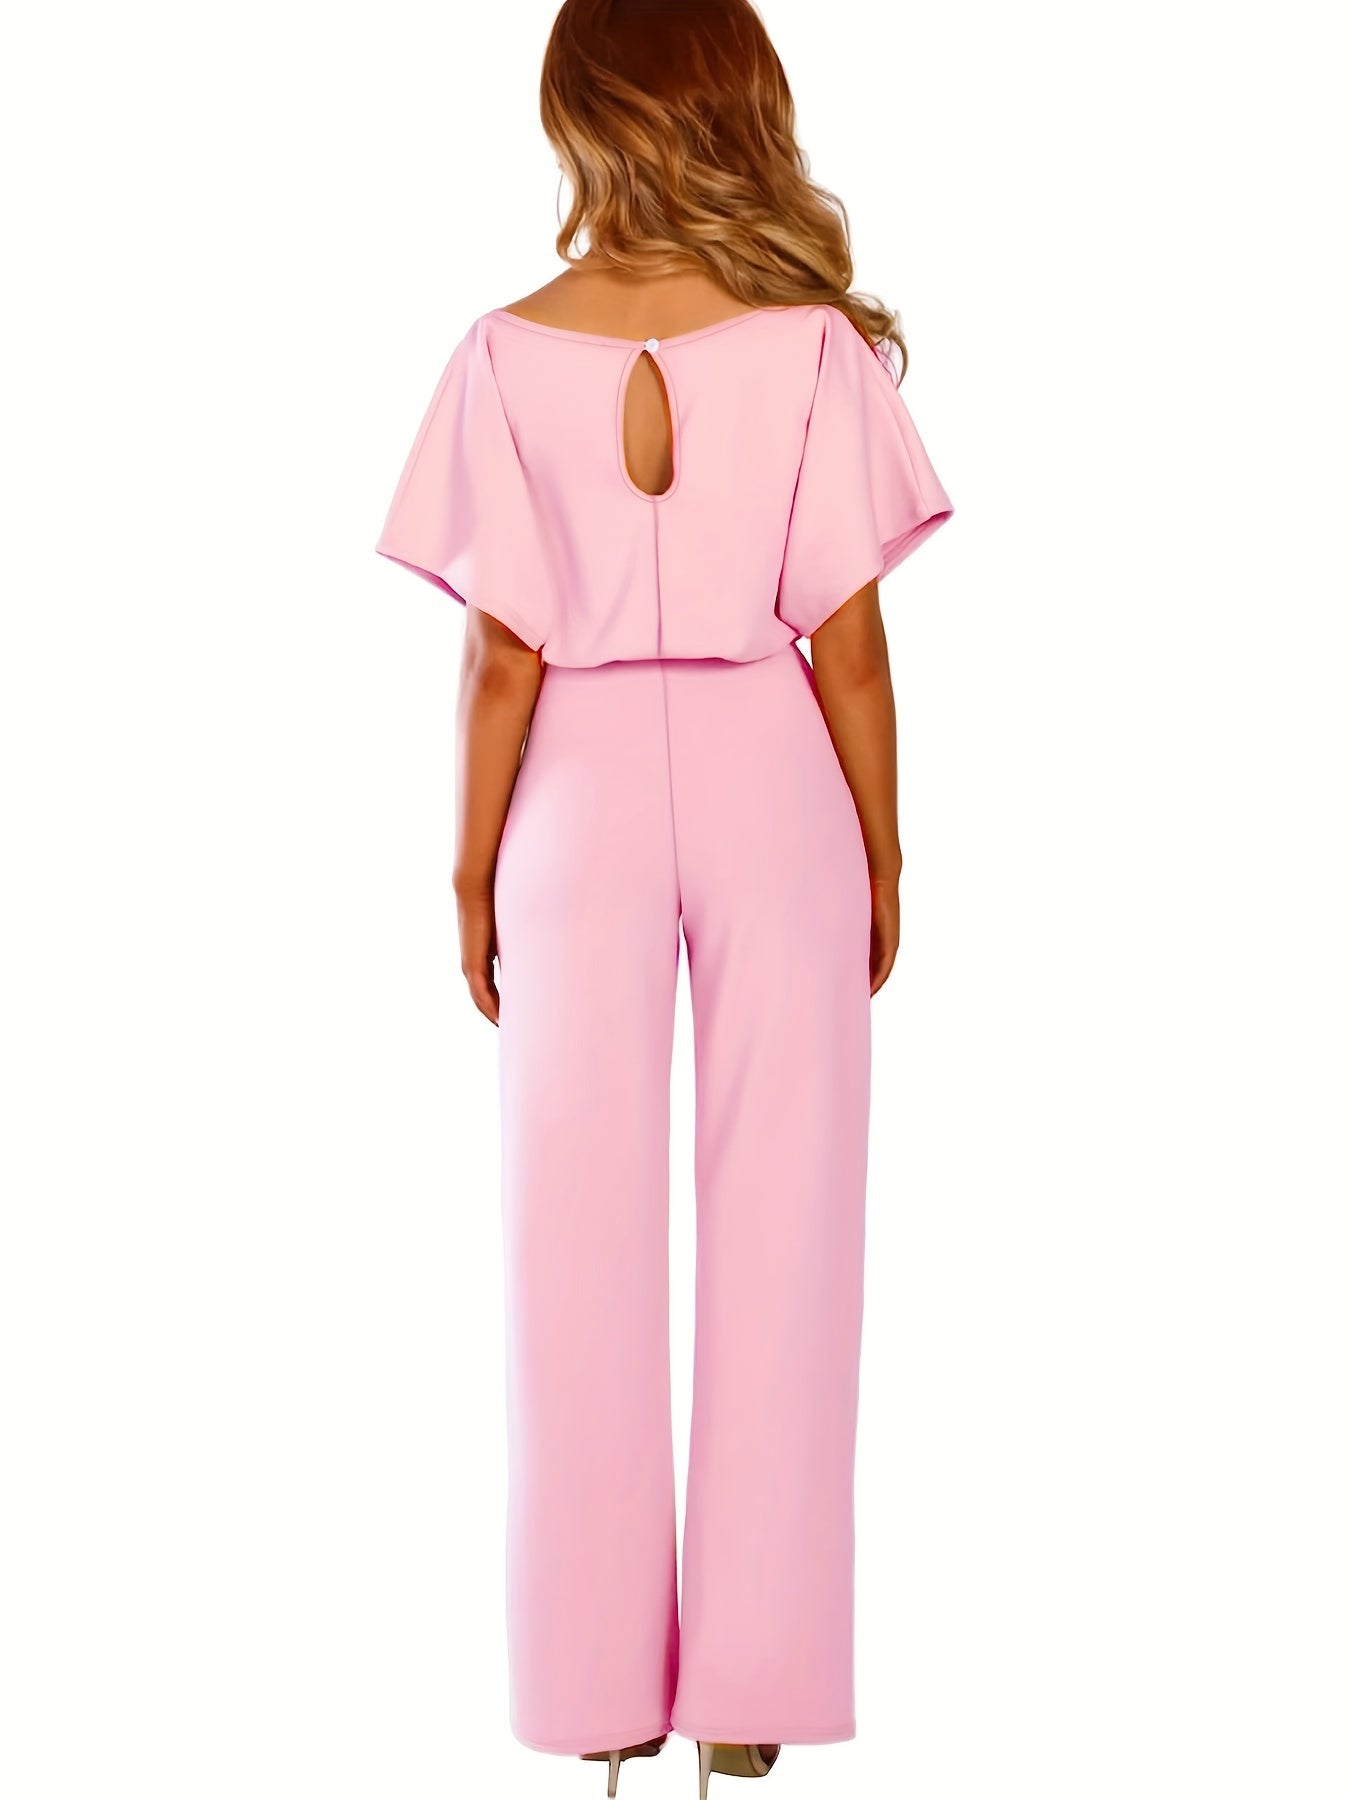 Tie Waist Straight Leg Jumpsuit, Casual Short Sleeve Jumpsuit For Spring & Summer, Women's Clothing